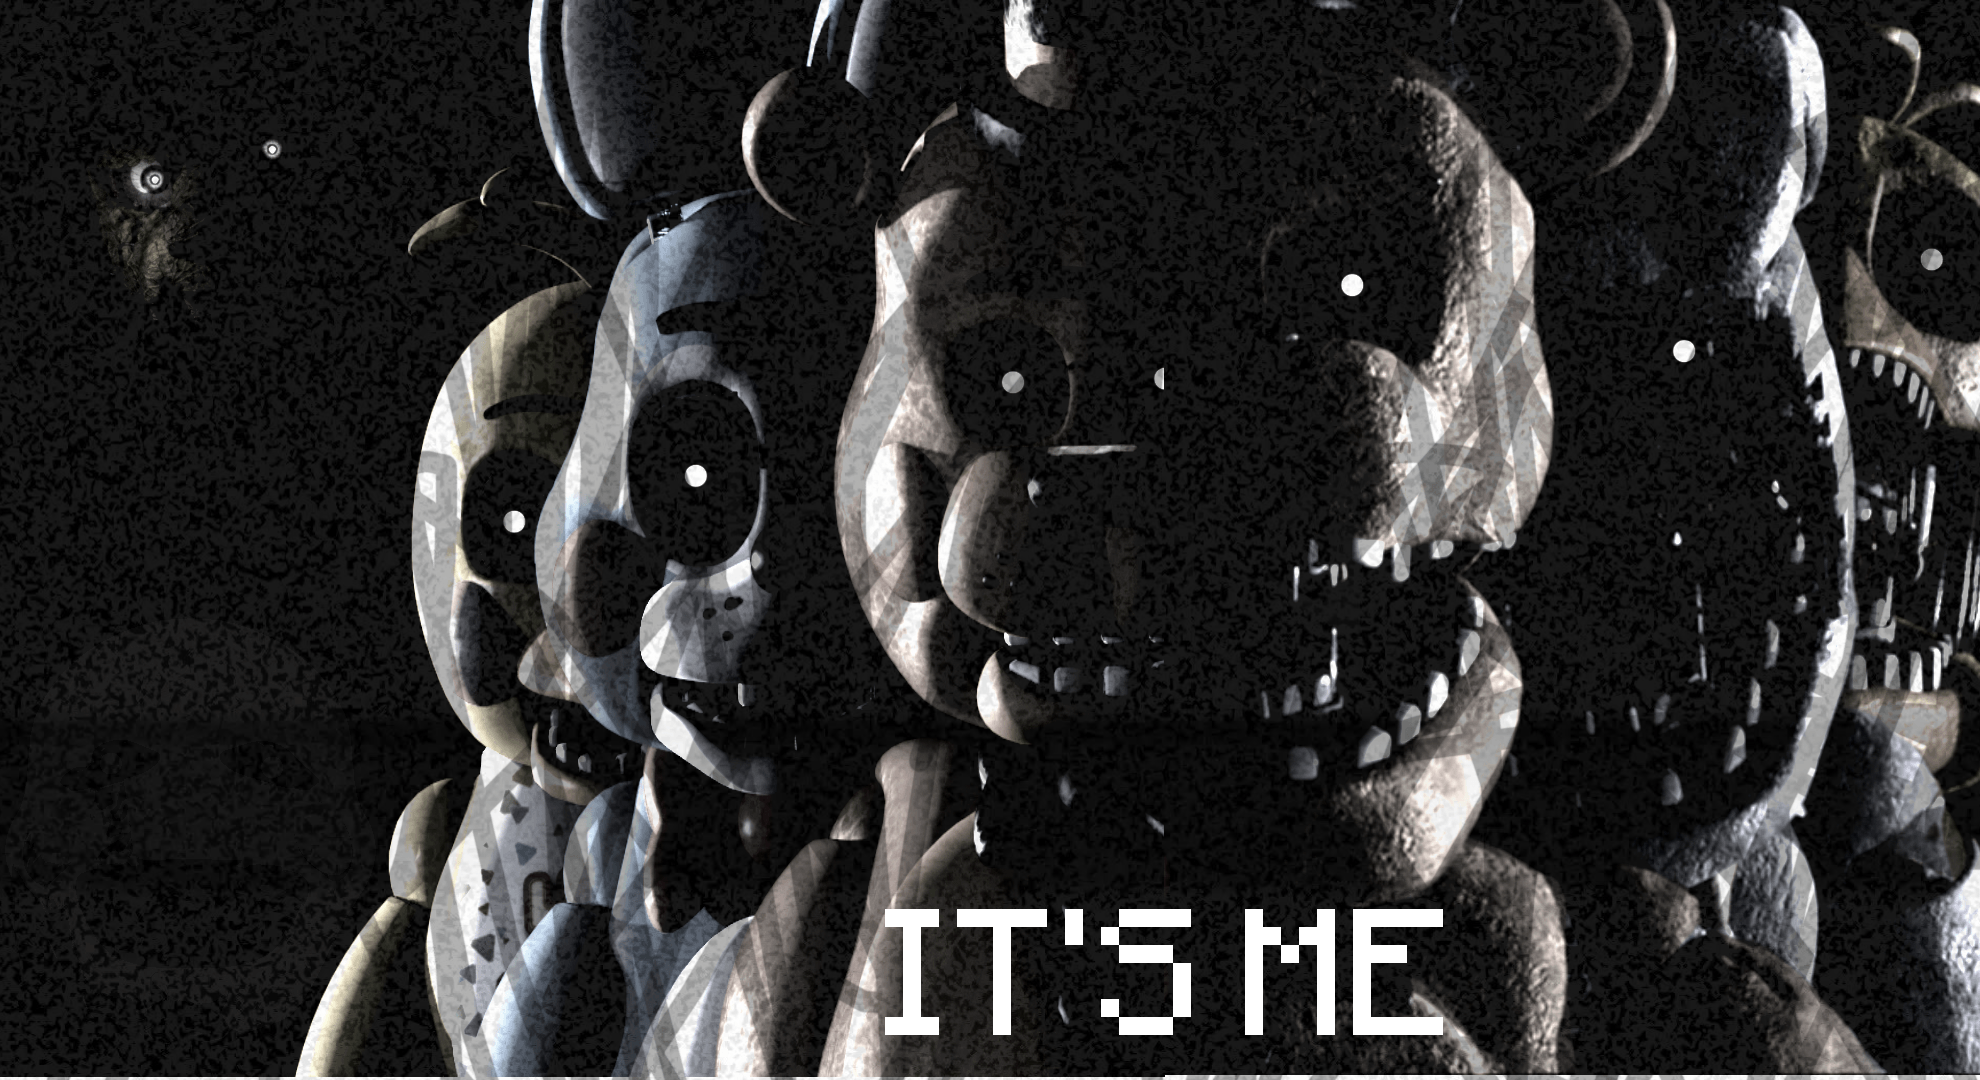 My Own FNAF Wallpaper. (You can download it if you'd like)